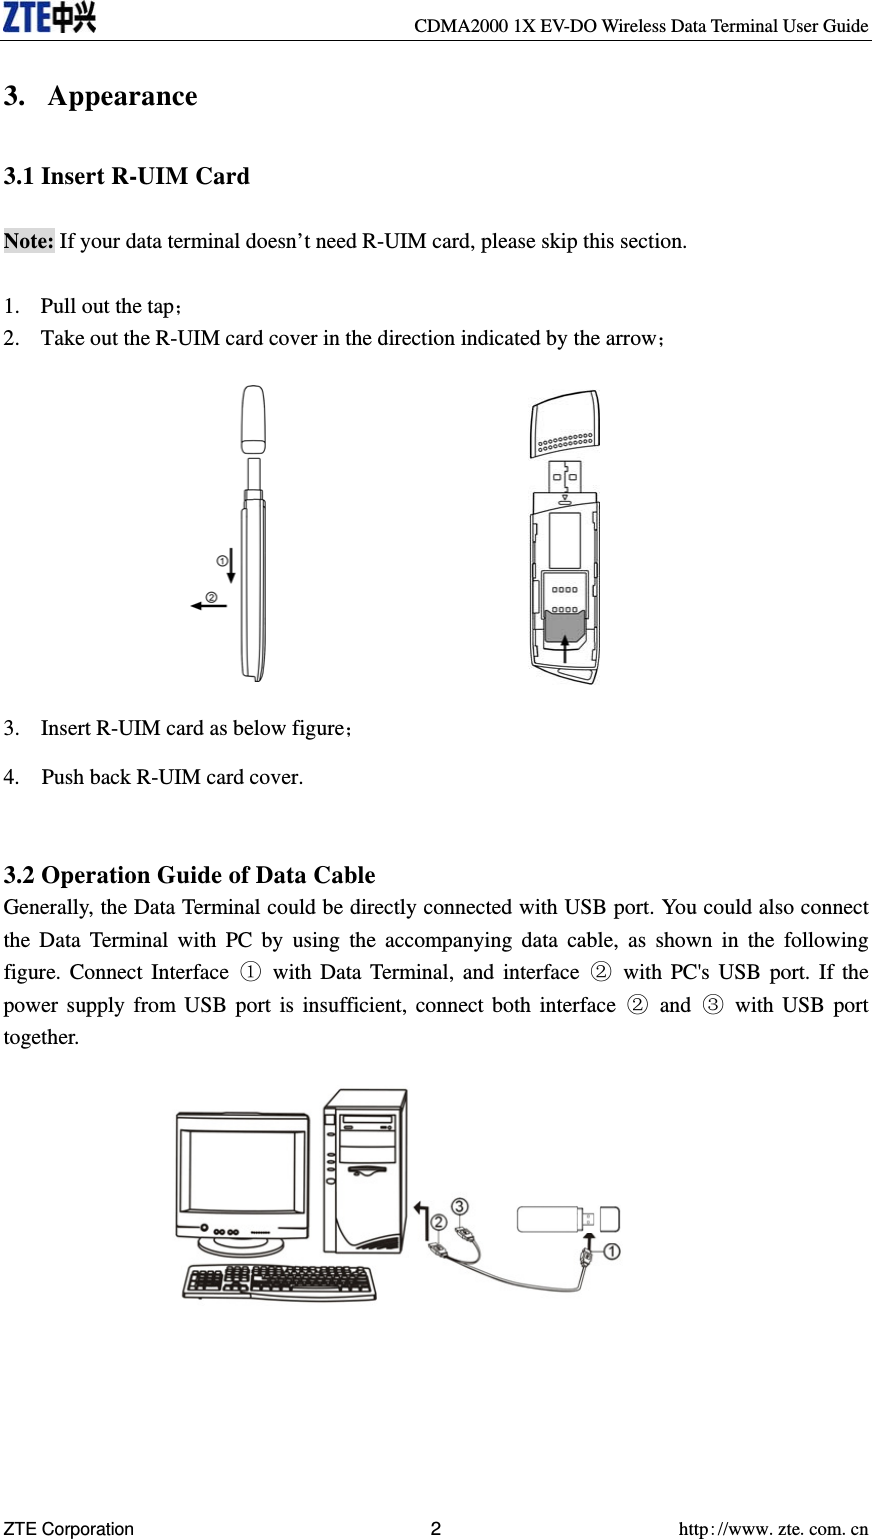     CDMA2000 1X EV-DO Wireless Data Terminal User Guide ZTE Corporation 2 http://www.zte.com.cn  3. Appearance  3.1 Insert R-UIM Card  Note: If your data terminal doesn’t need R-UIM card, please skip this section.  1. Pull out the tap； 2. Take out the R-UIM card cover in the direction indicated by the arrow；            3. Insert R-UIM card as below figure； 4.    Push back R-UIM card cover.   3.2 Operation Guide of Data Cable Generally, the Data Terminal could be directly connected with USB port. You could also connect the Data Terminal with PC by using the accompanying data cable, as shown in the following figure. Connect Interface ① with Data Terminal, and interface ② with PC&apos;s USB port. If the power supply from USB port is insufficient, connect both interface ② and ③ with USB port together.            